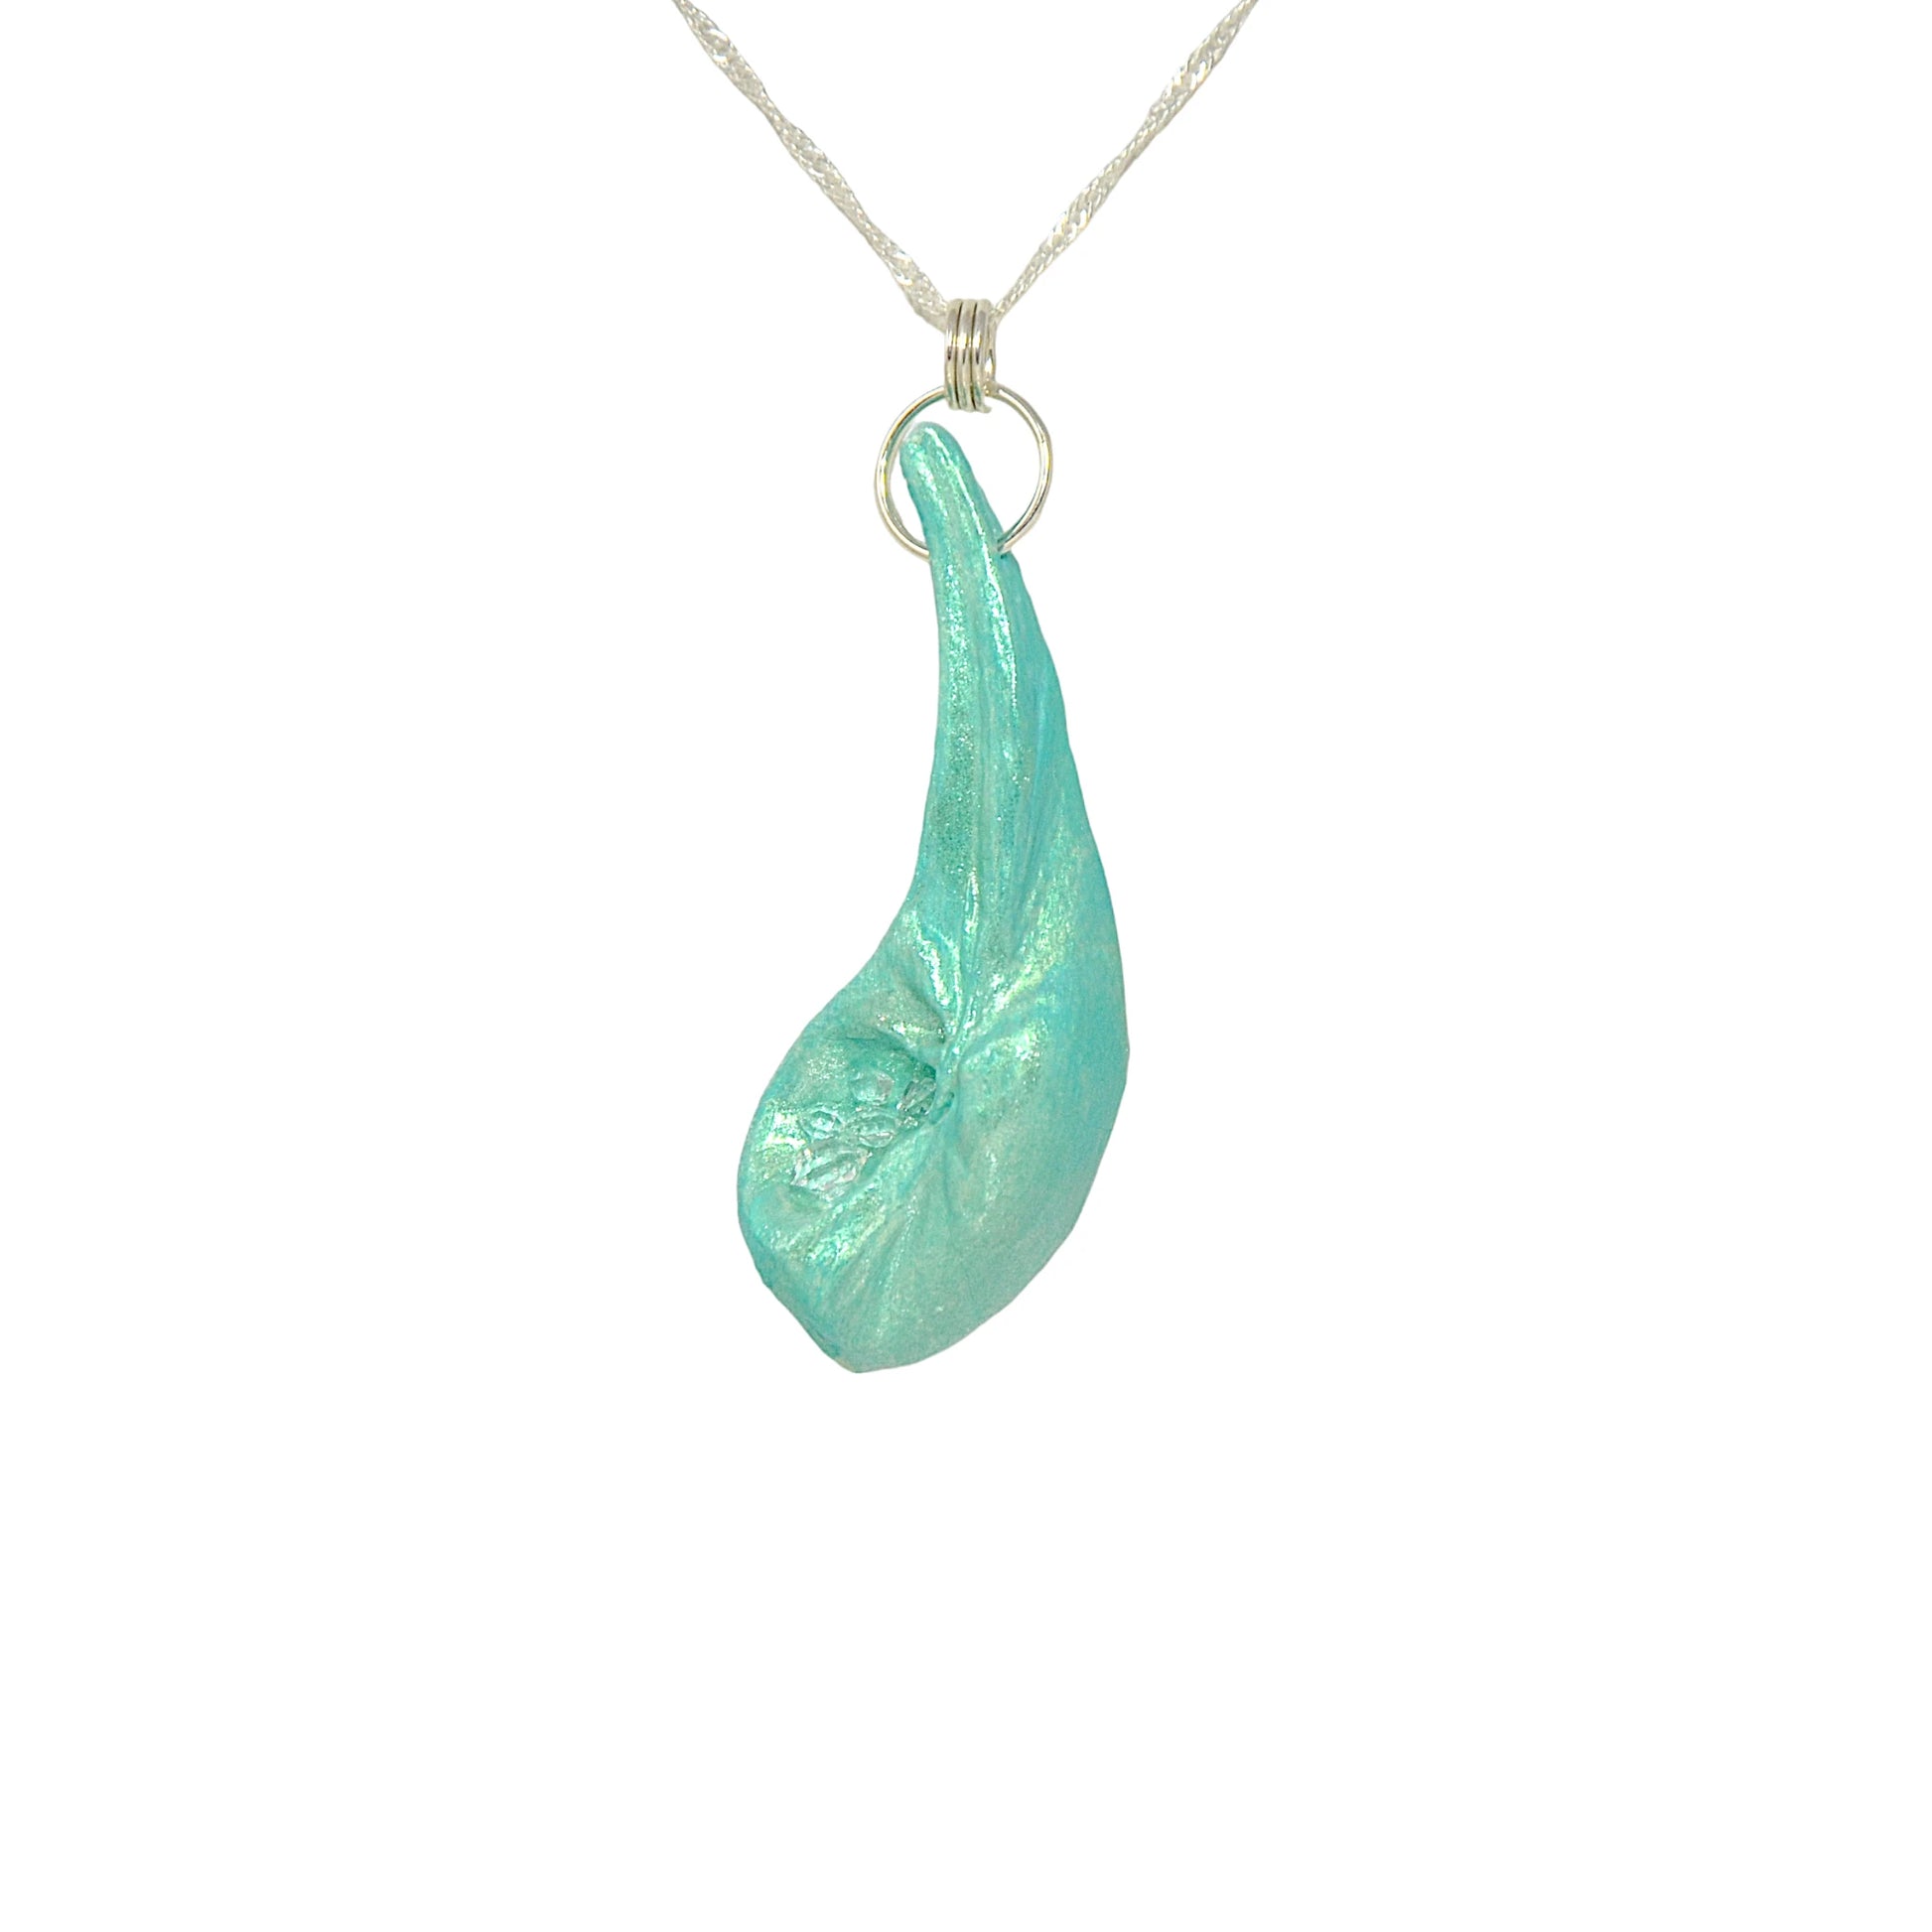 The Cascadia Pendant created with a natural seashell from the beaches of Vancouver Island.  The seashell is turquoise and has high quality herkimer diamonds.